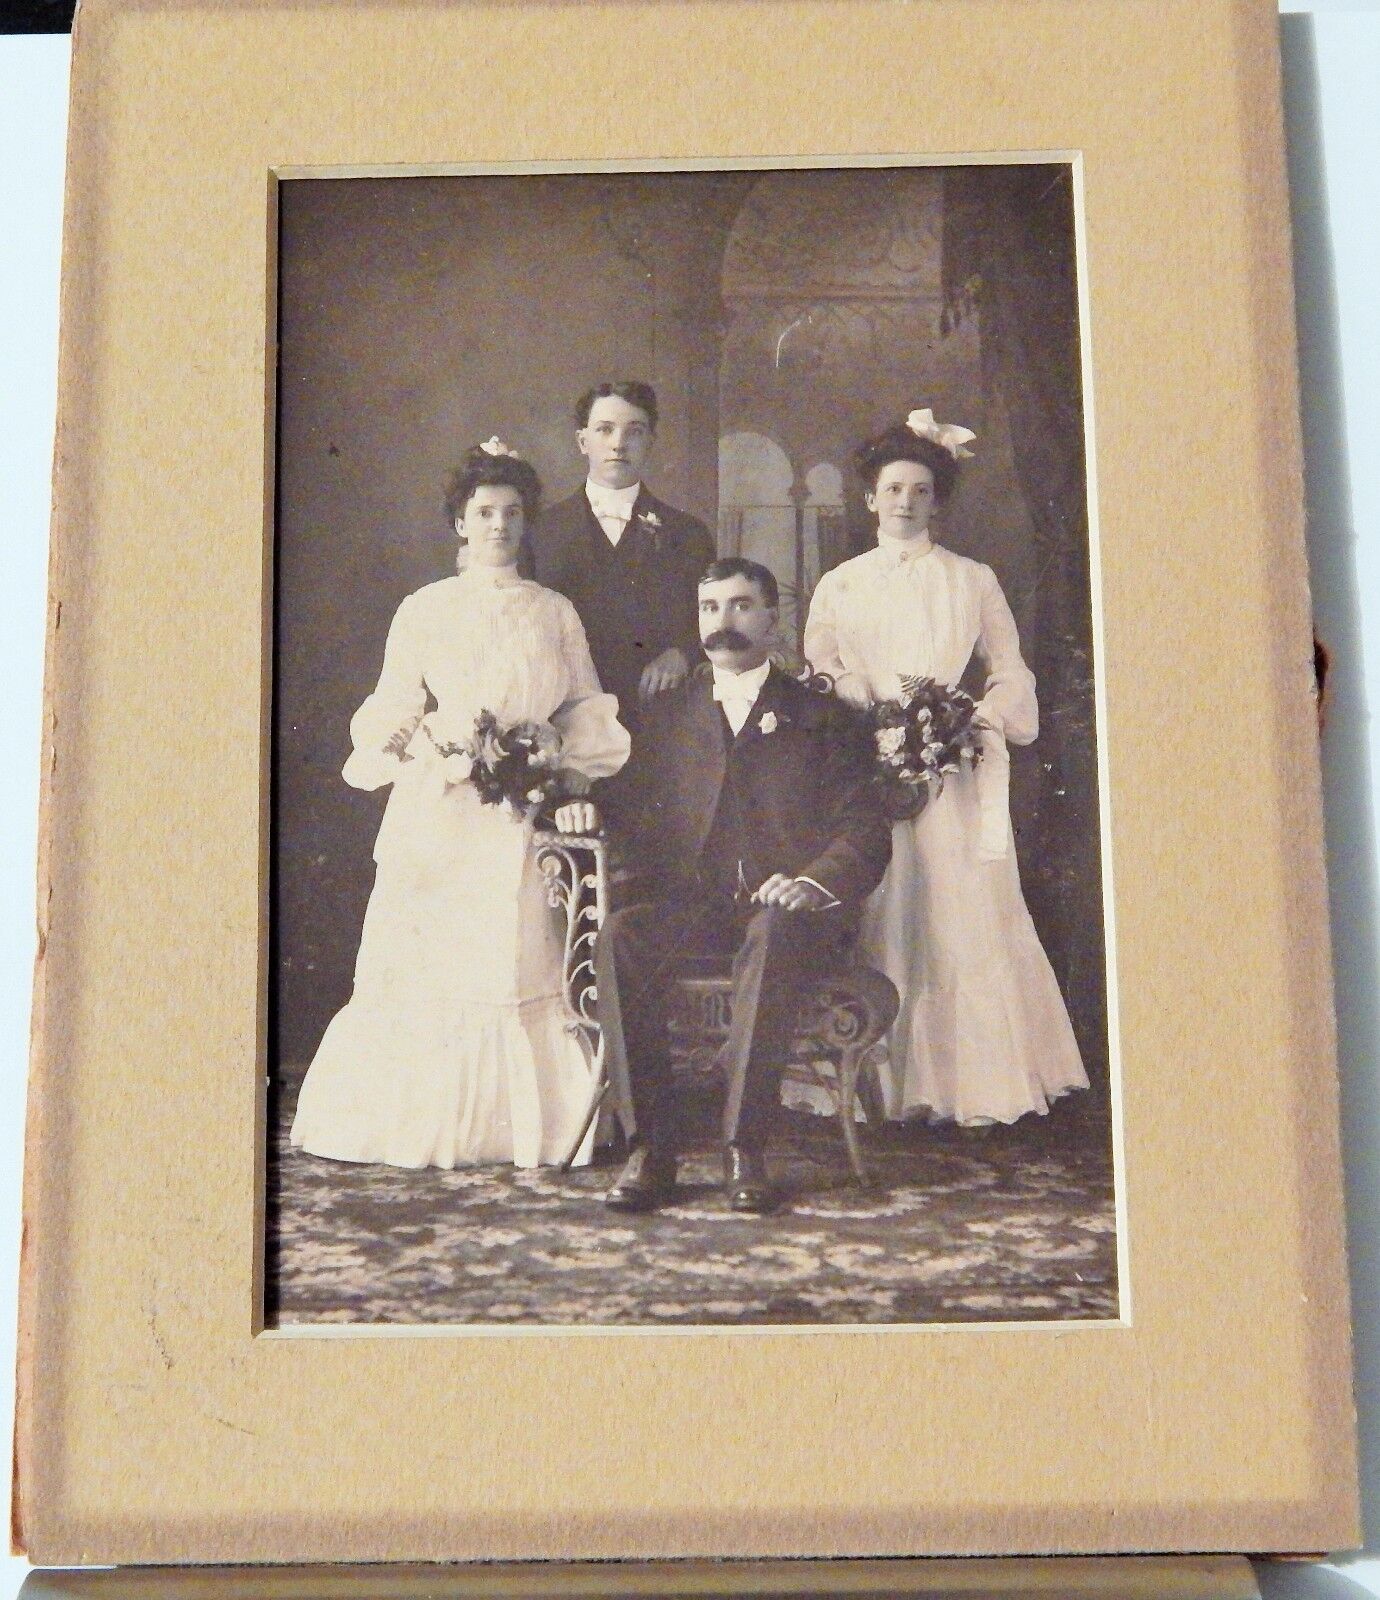 RARE VINTAGE 5 1/4 X 3 3/4 FORMAL Photo Poster paintingGRAPH, MAYBE A WEDDING?, NICE IMAGES